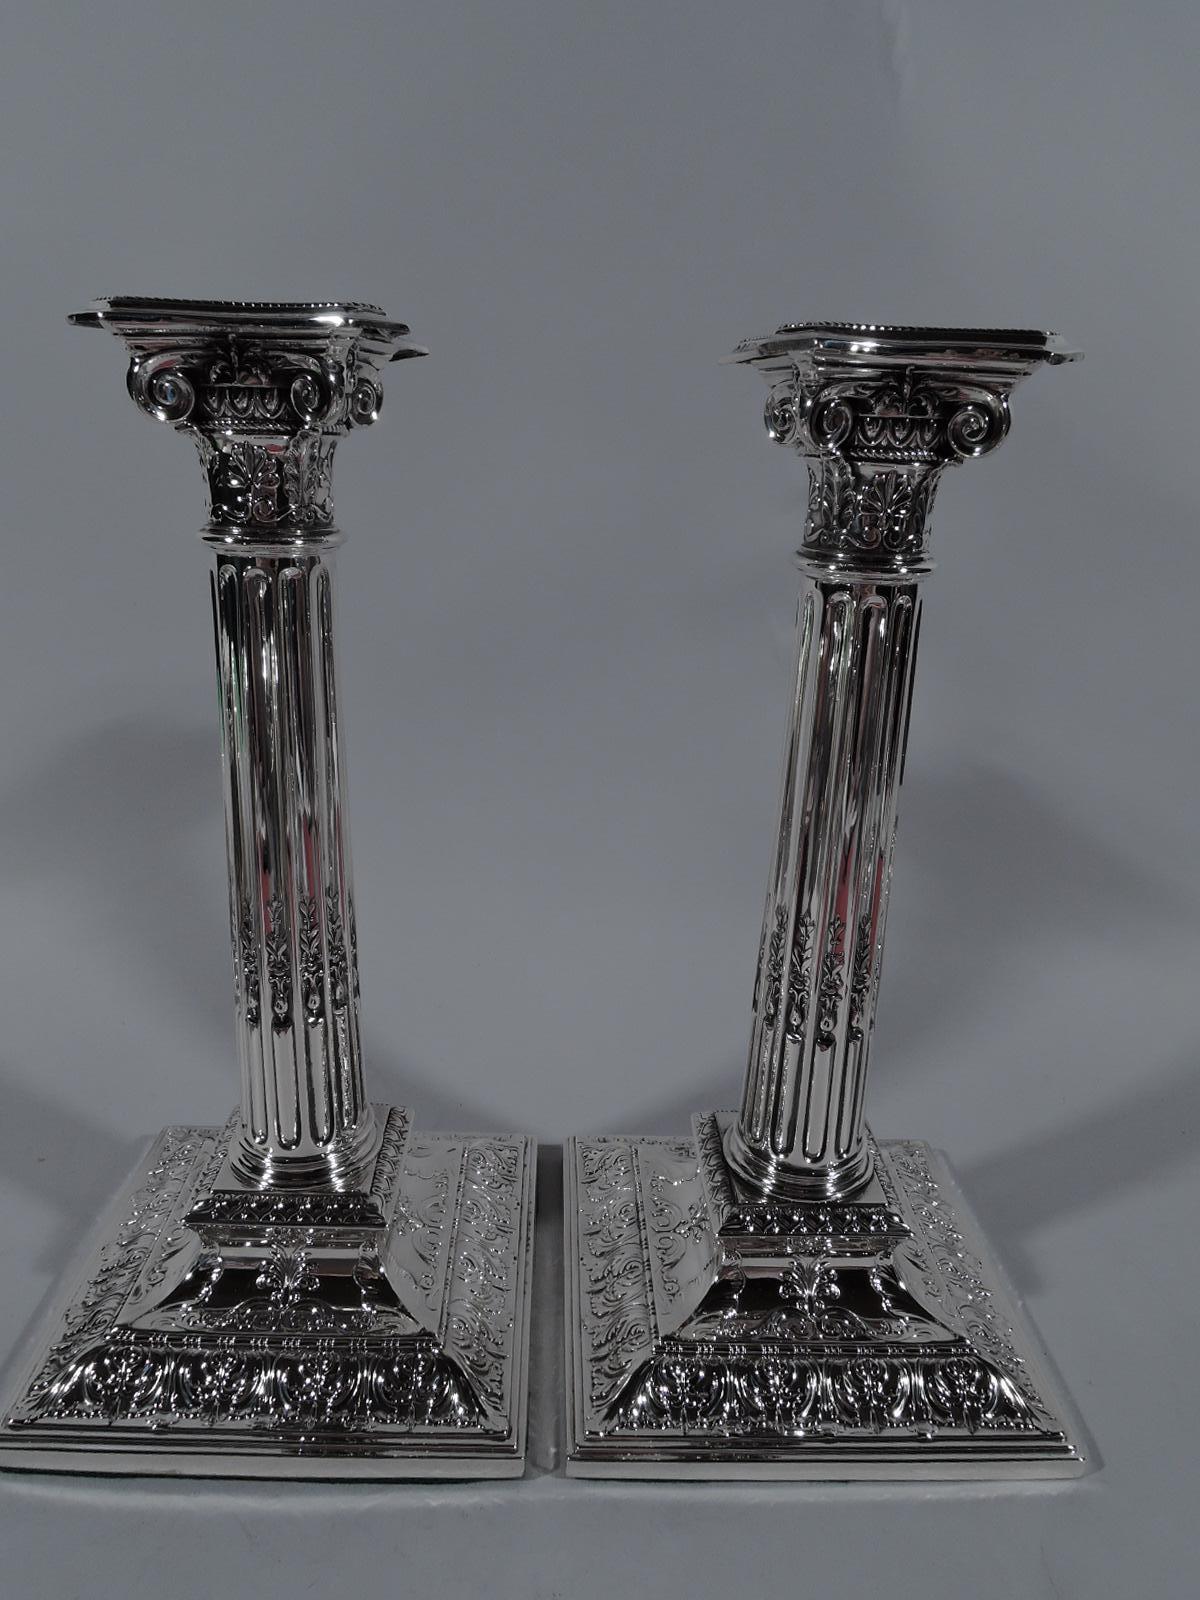 Pair of Edwardian sterling silver candlesticks. Made by Reed & Barton in Taunton, Mass., circa 1910. Each: Classical column with stop fluting and ionic capital. Base raised and square and bobeche detachable. Low relief ornament including